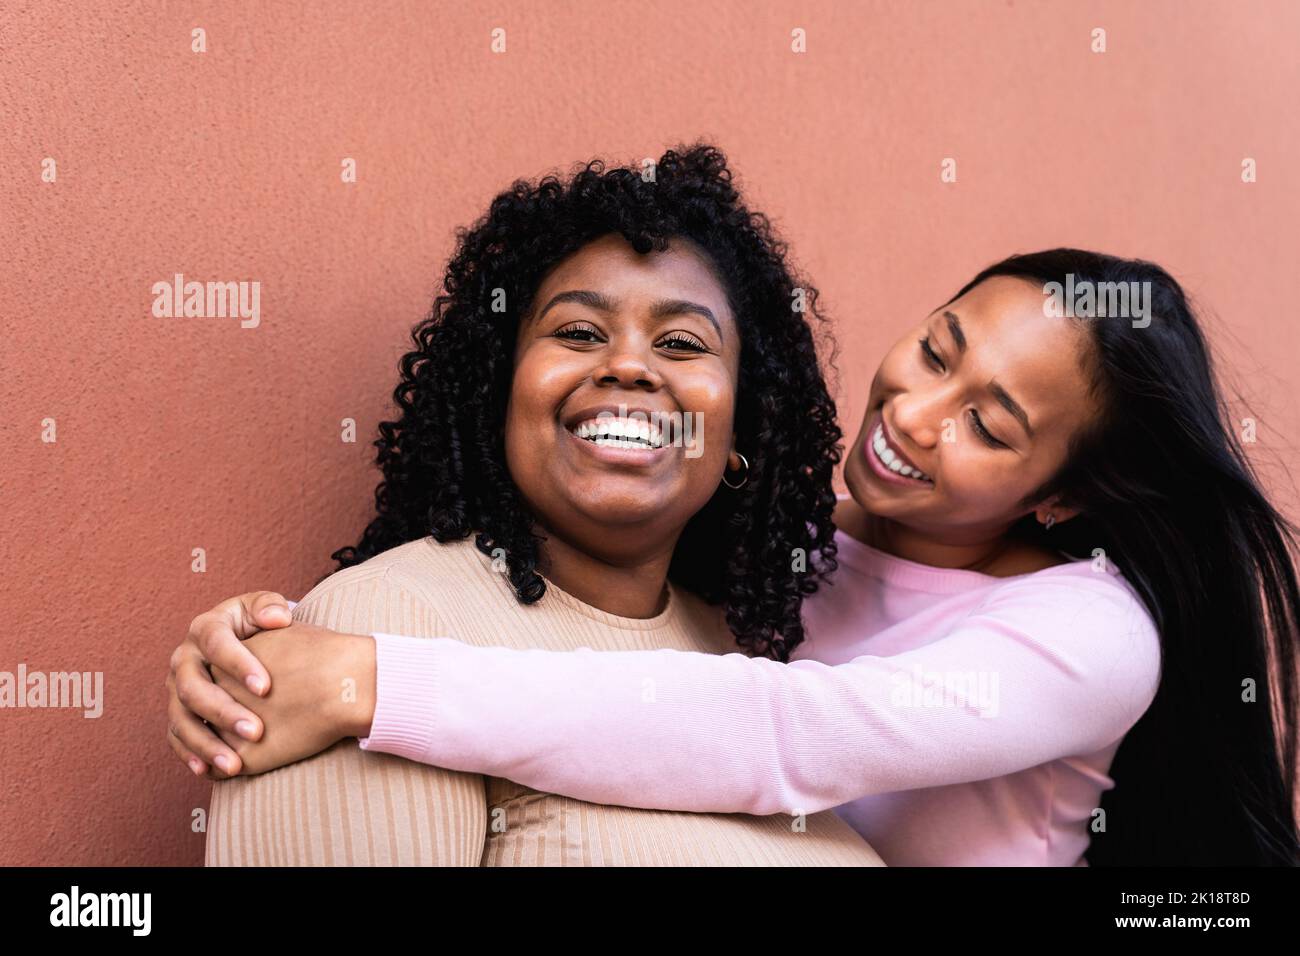 Happy Latin girls having fun embracing outdoor - Young people lifestyle and friendship concept Stock Photo